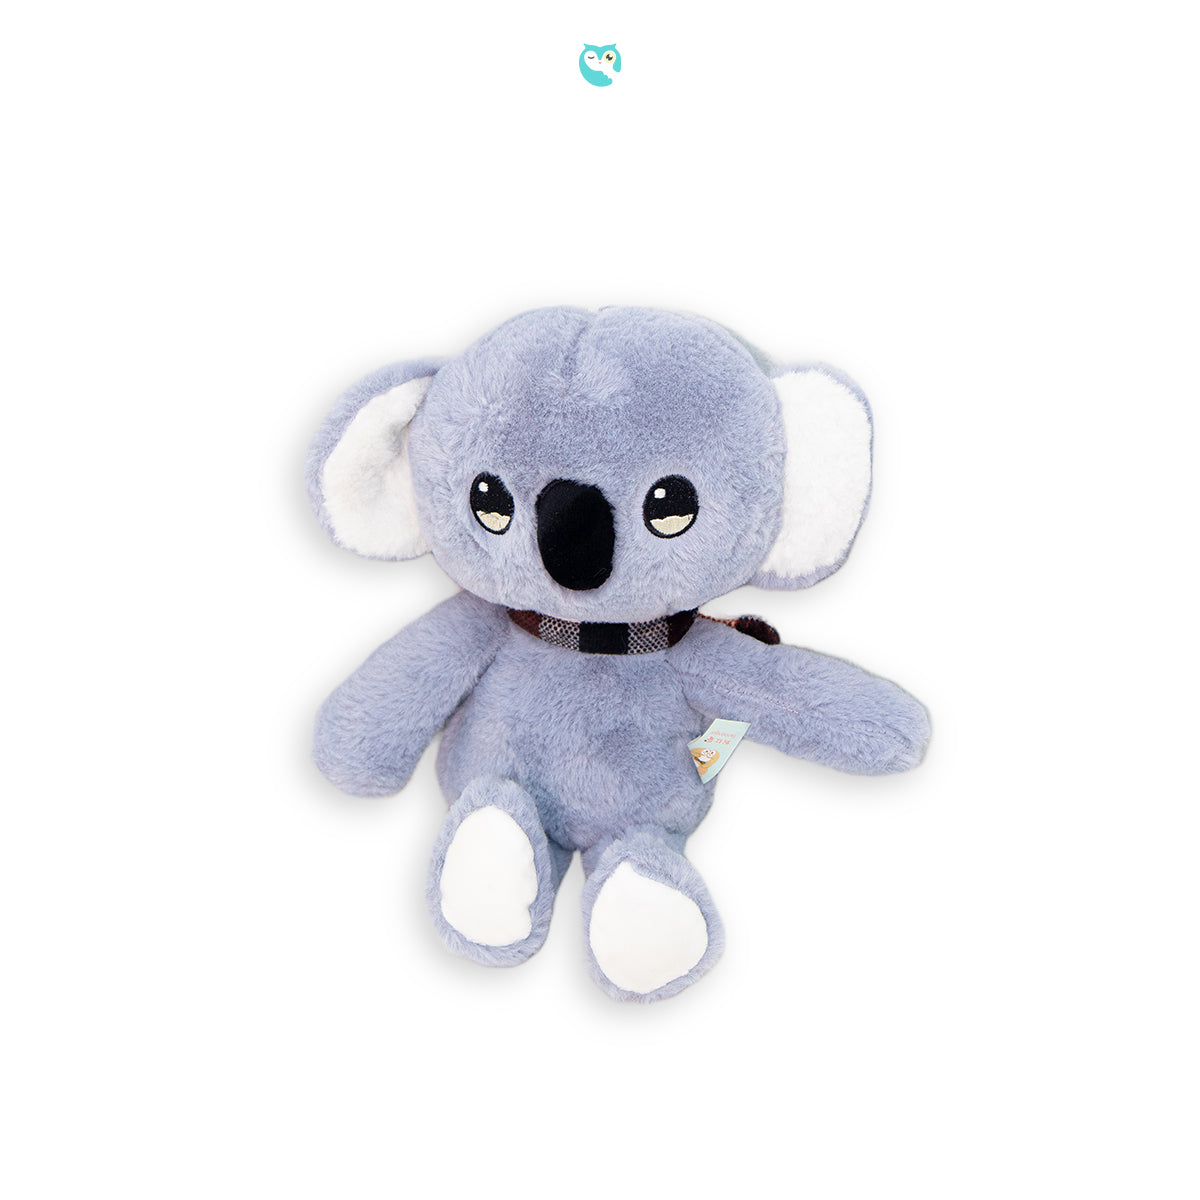 7" Cozy Cuddles Plush Toy Collection